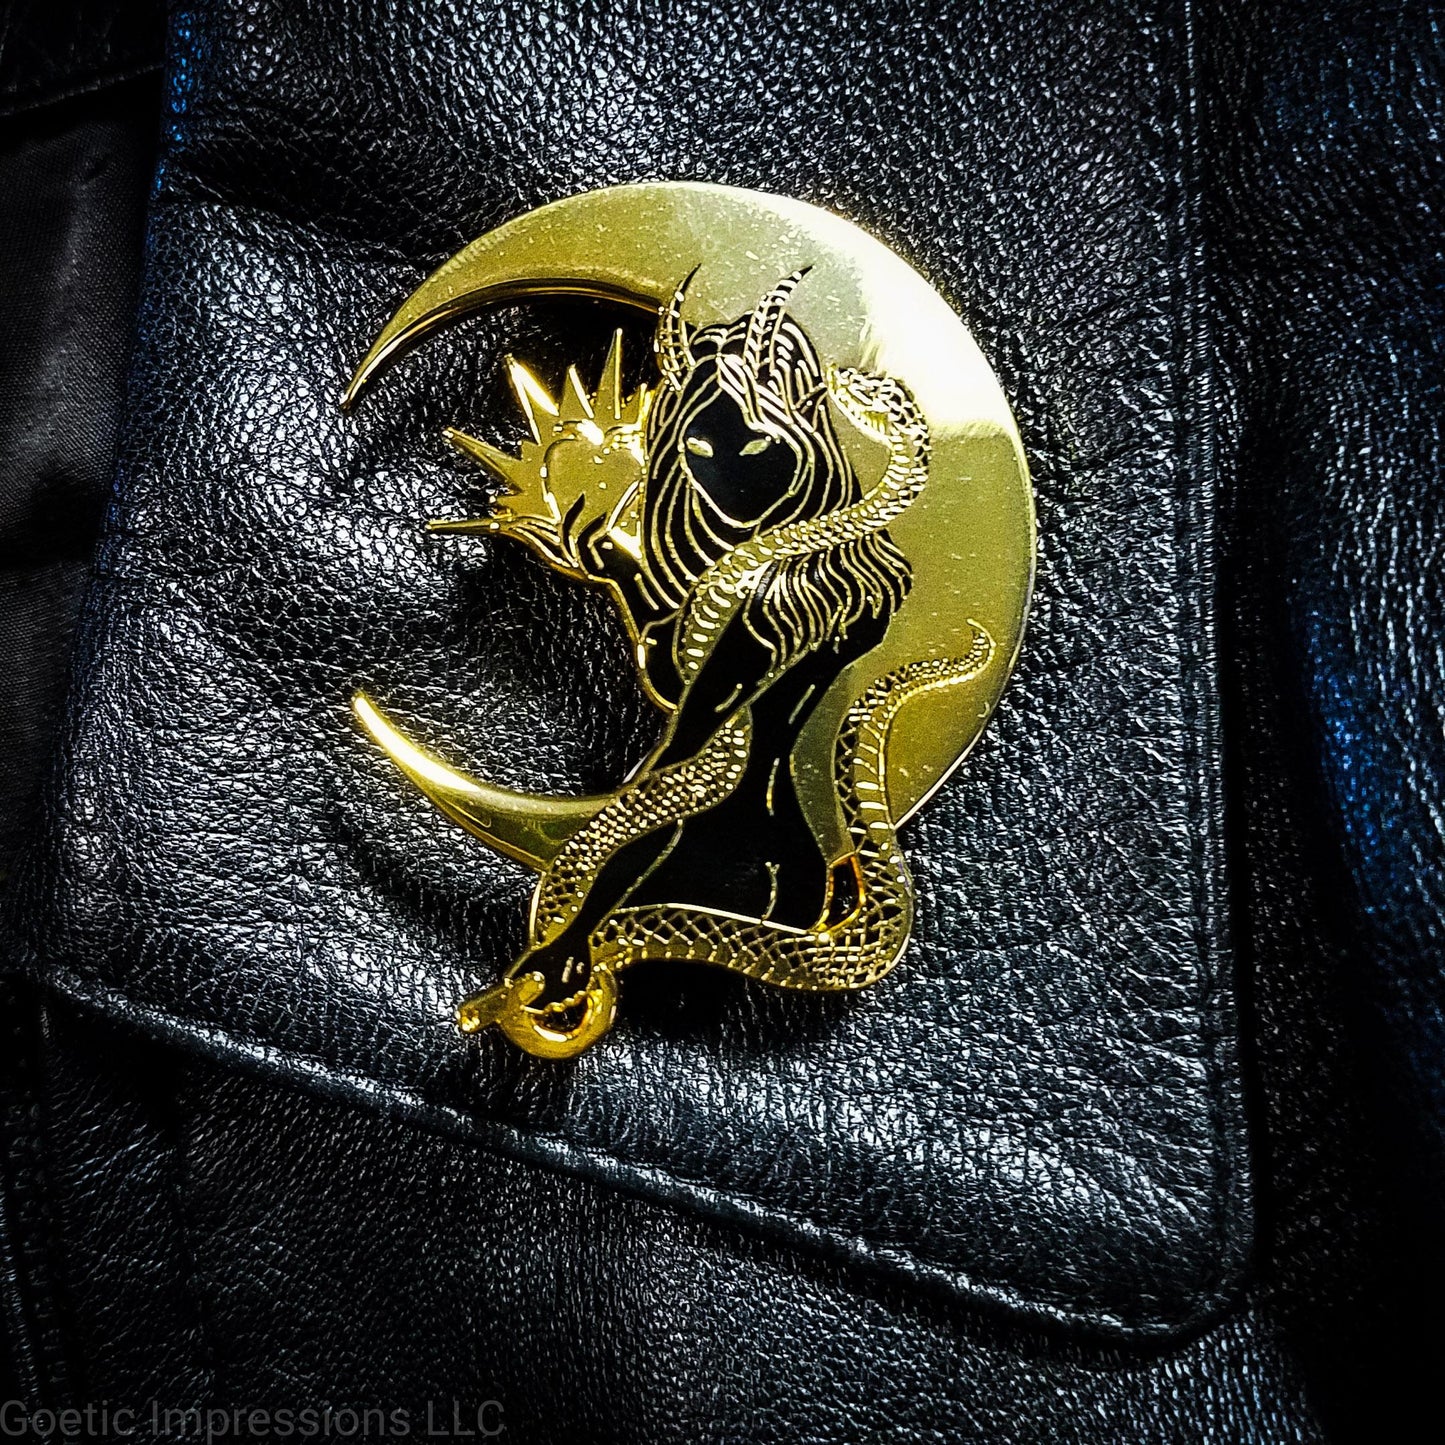 A black and gold pin of the demoness Lilith on a black leather jacket. The hard enamel pin shows Lilith holding a glowing apple riased in one hand and a serpent encricling her other arm. A cresent moon is backdropped behind her. She is also holding a circle and rod in her other hand.